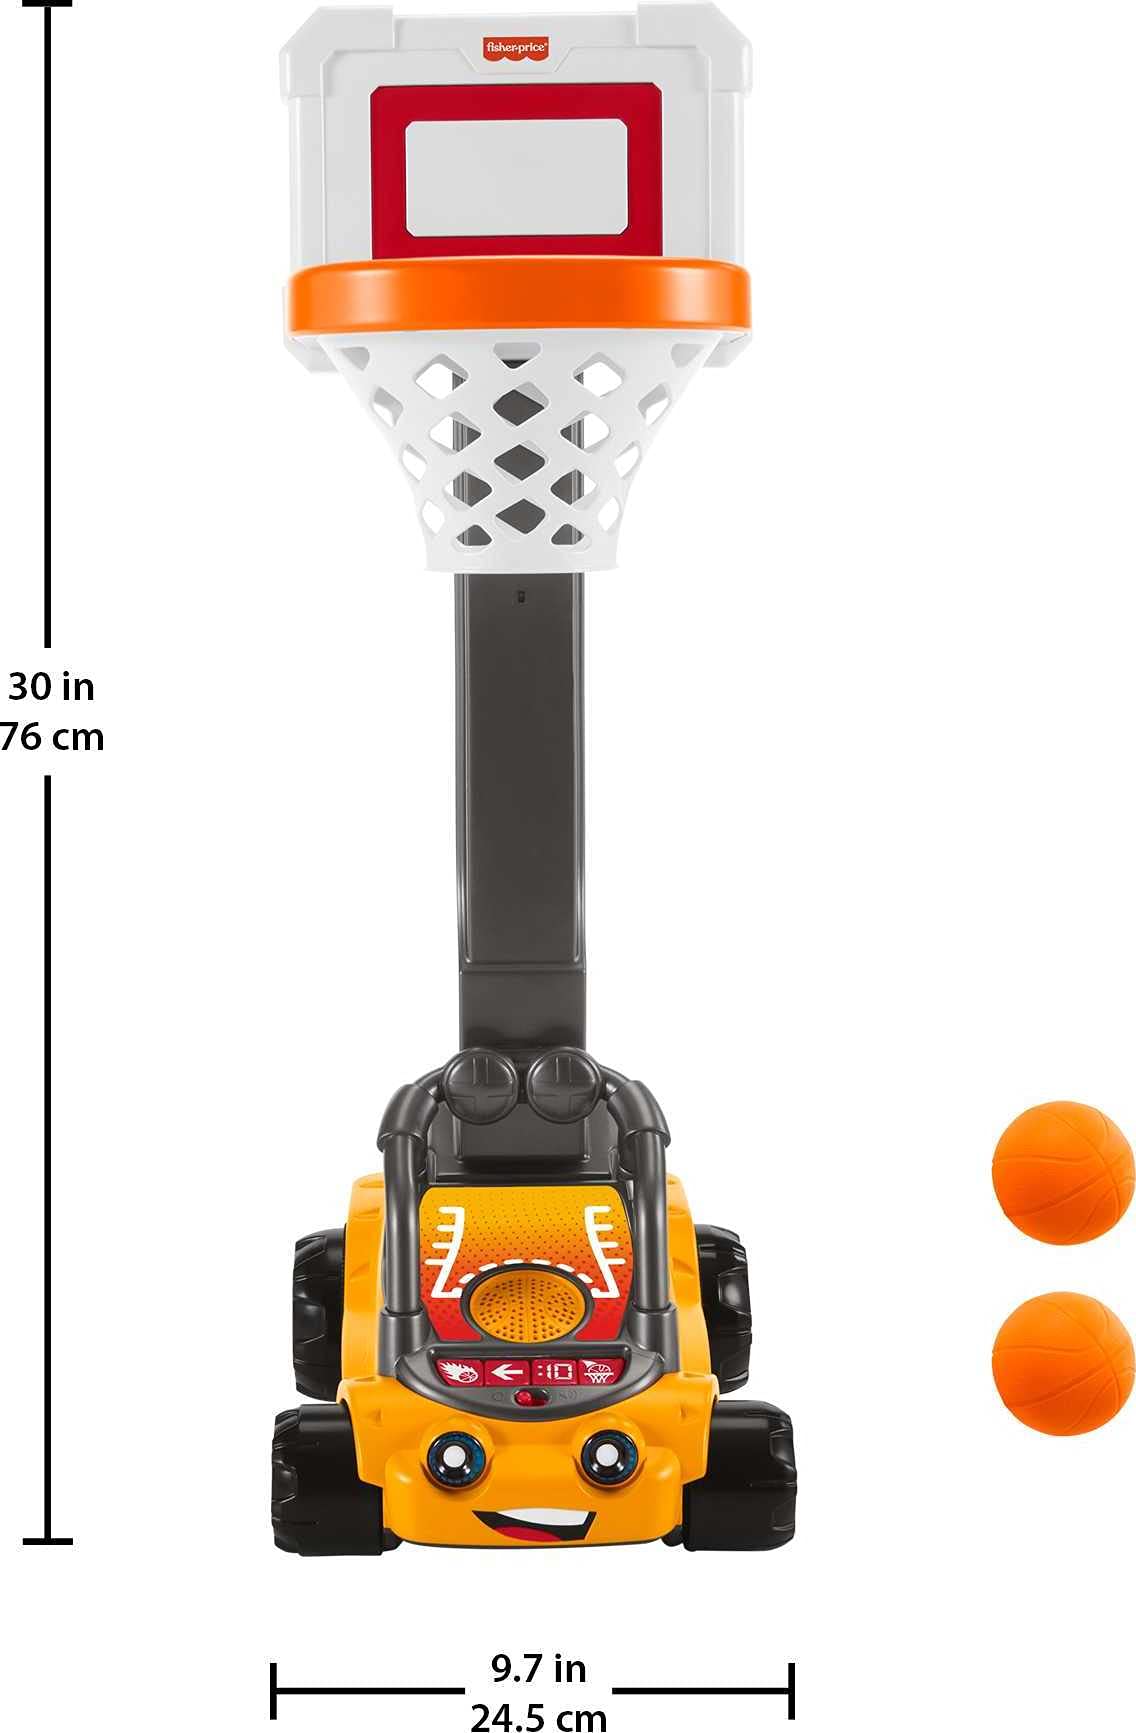 Fisher-Price B.B. Hoopster, Motorized Electronic Basketball Toy with Lights, Sounds and Game Play for Preschool Kids Ages 3 Years and Older